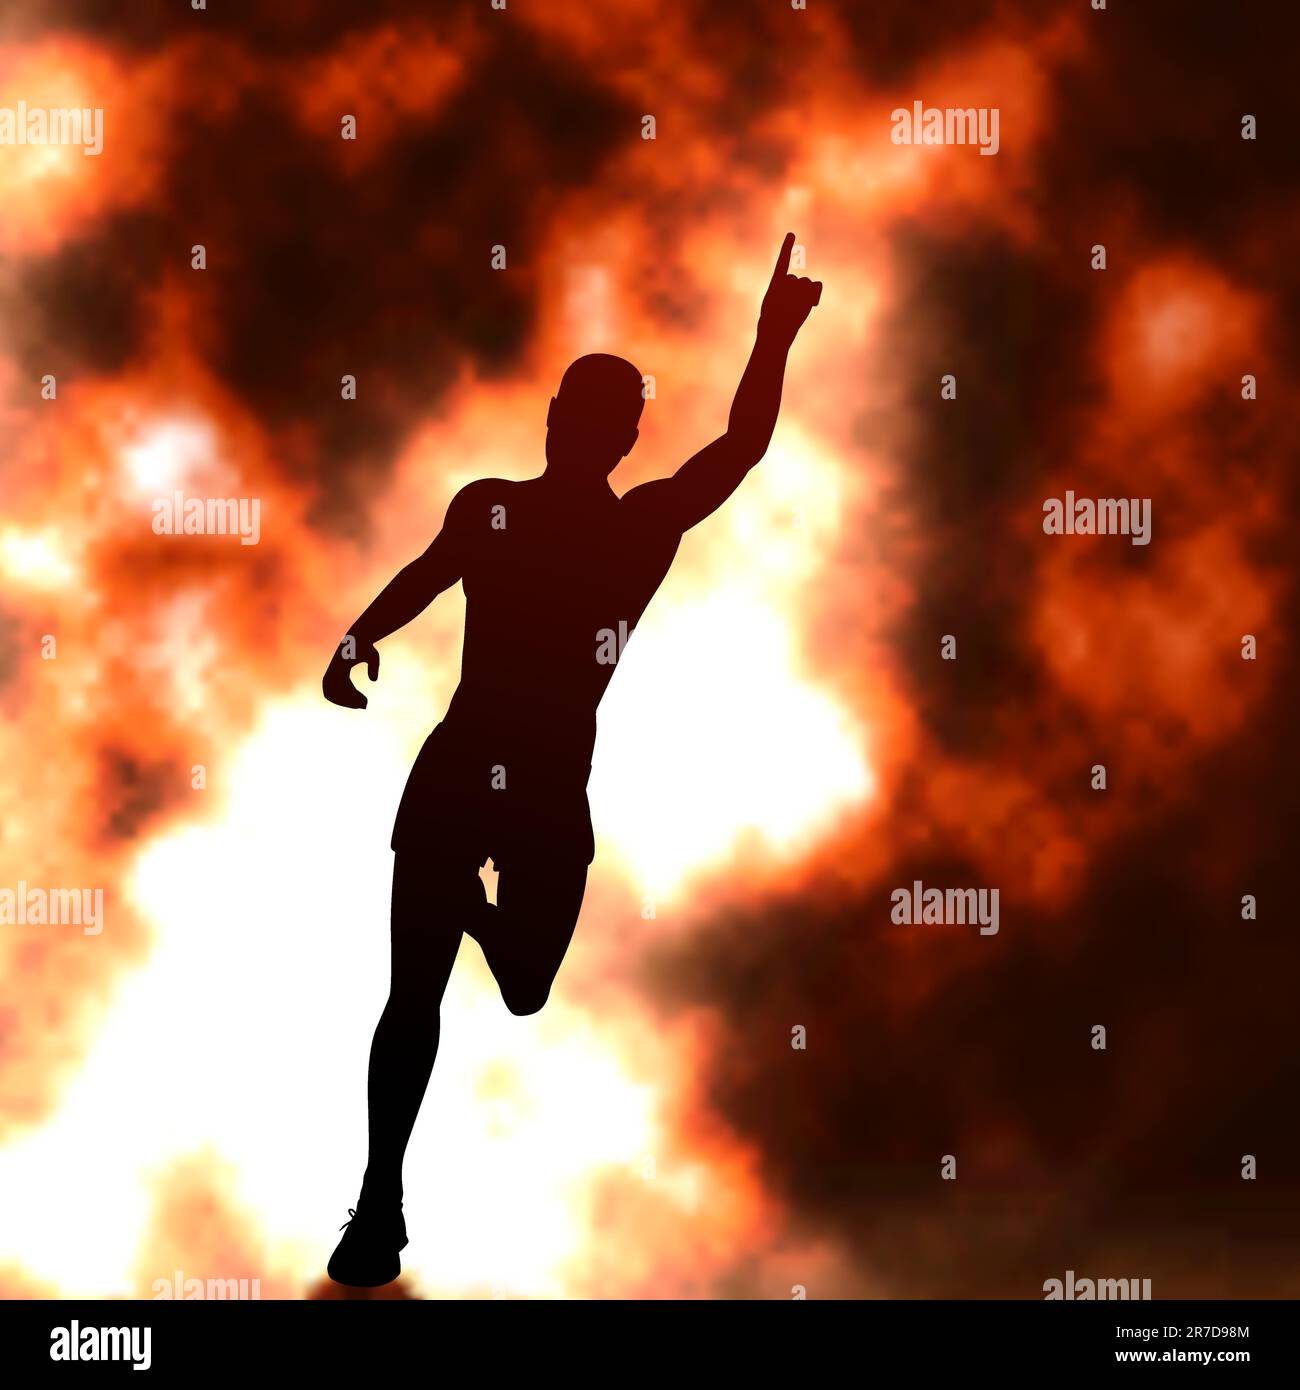 Editable vector silhouette of a running man with raised arm and fiery smoke behind with background made using a gradient mesh Stock Vector